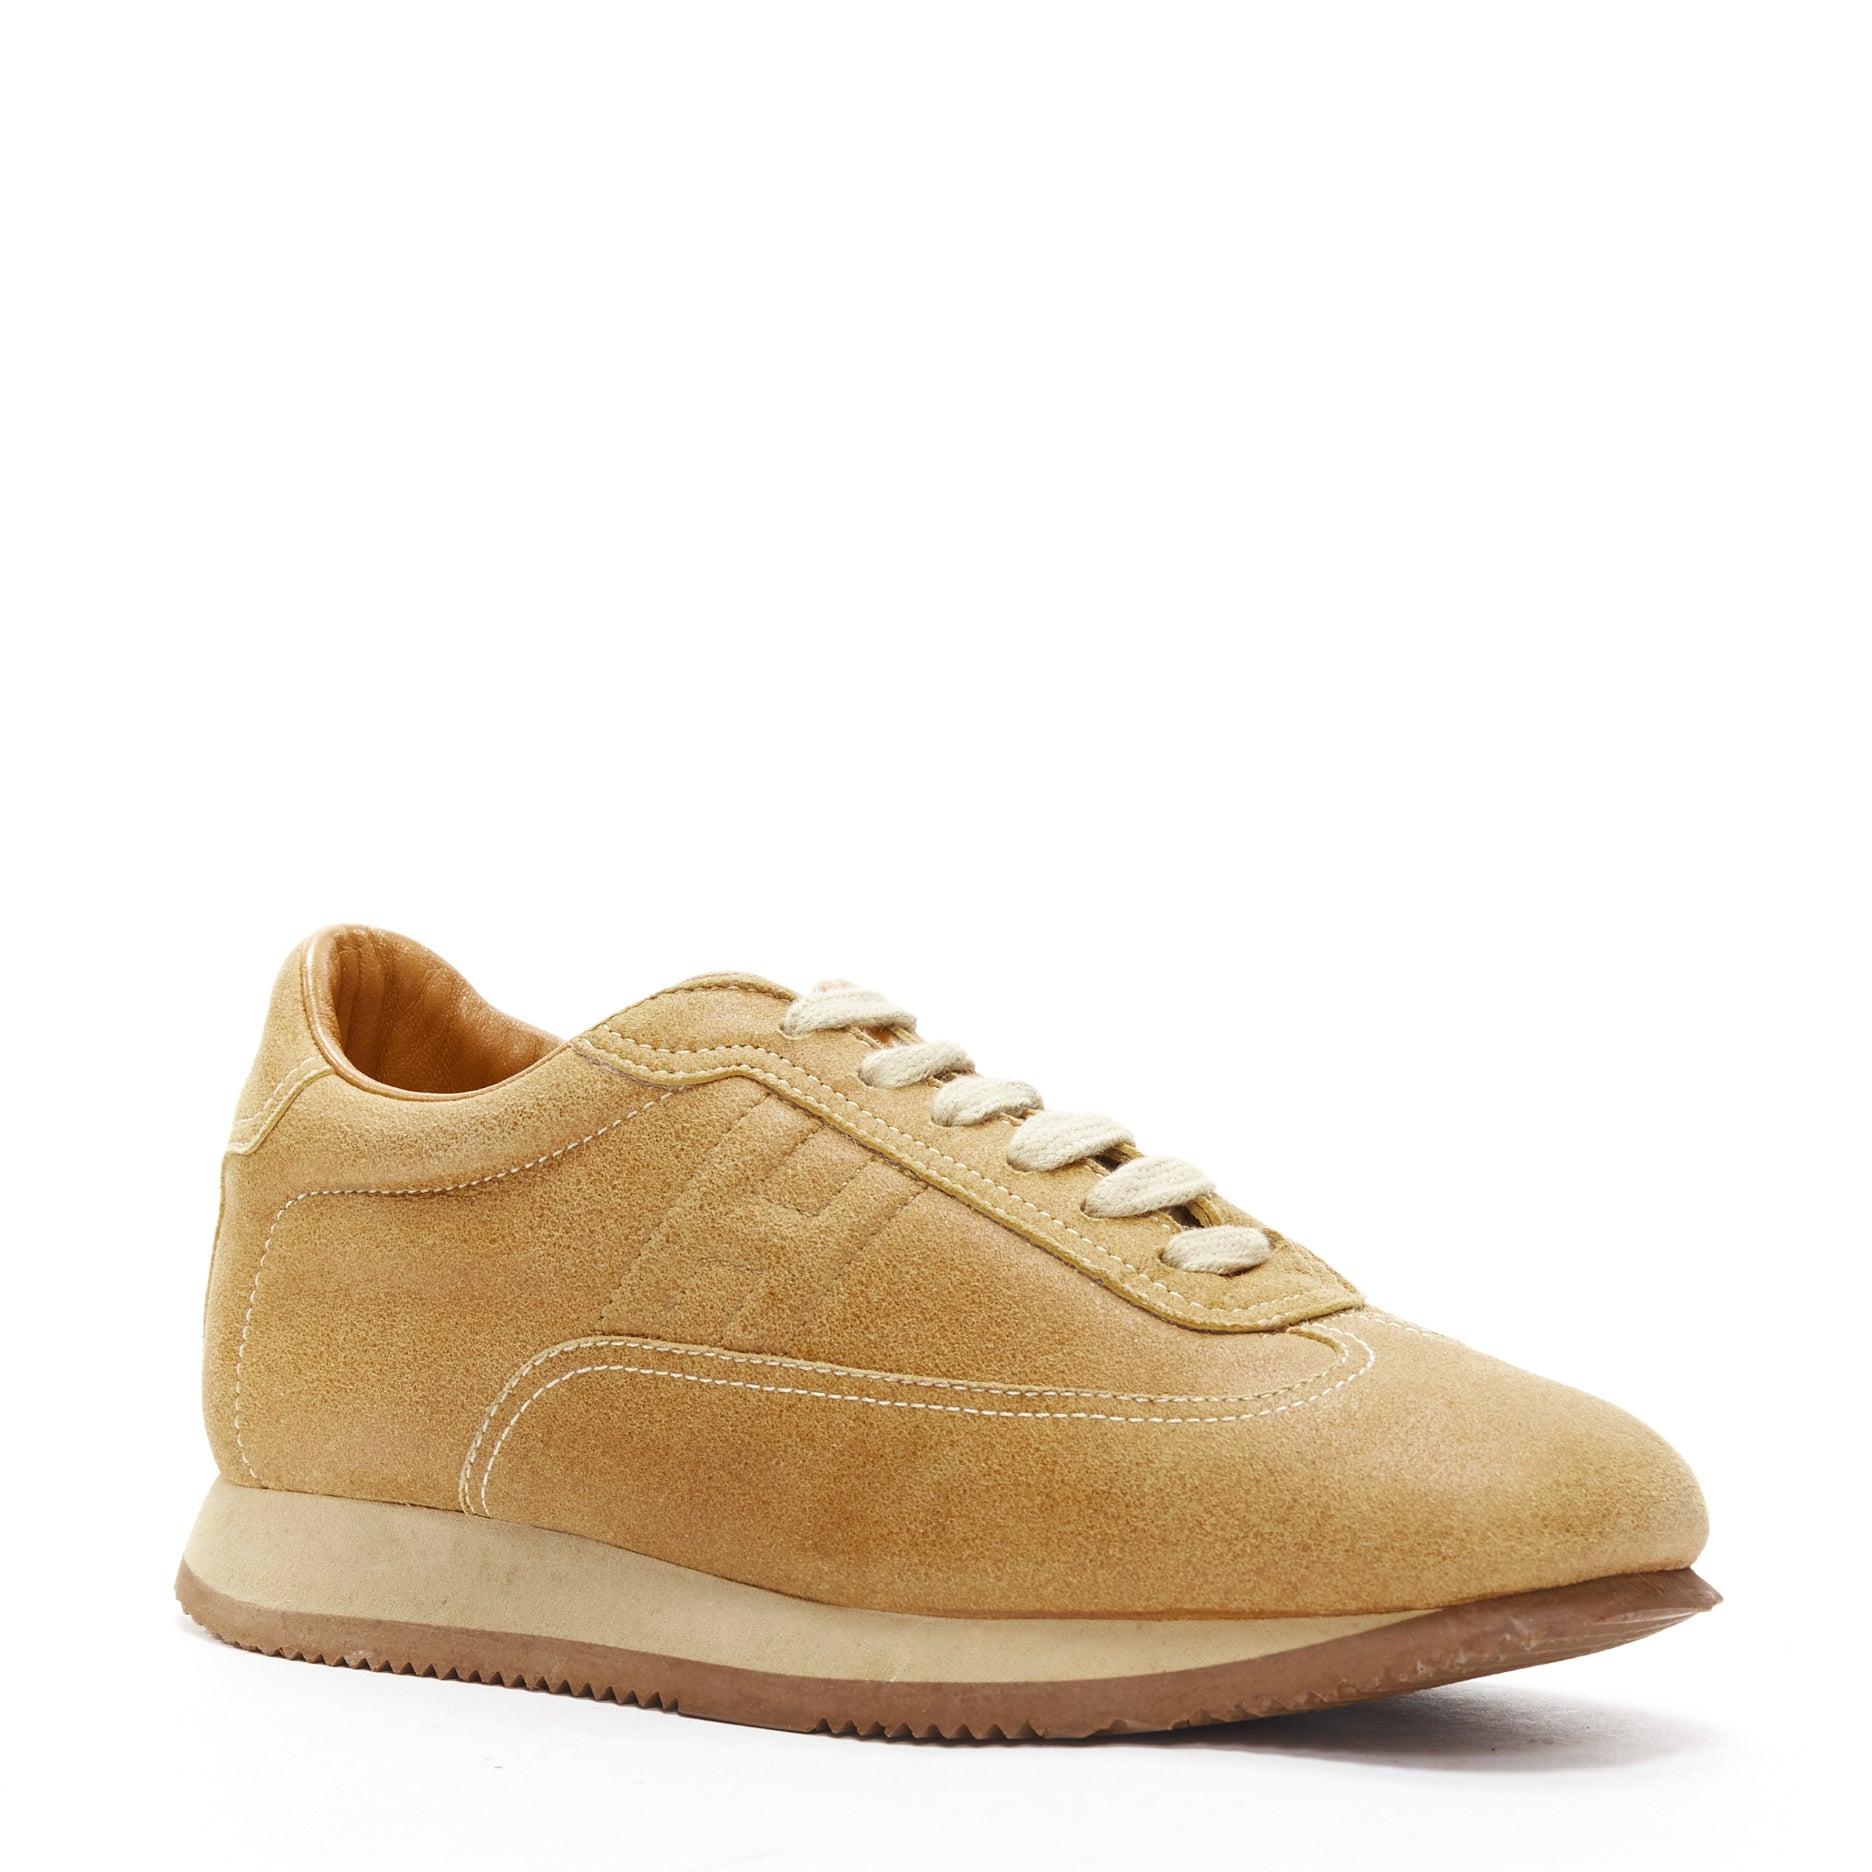 HERMES Quick tan suede H logo low top sneakers EU37.5
Reference: GIYG/A00362
Brand: Hermes
Model: Quick H
Material: Leather
Color: Brown
Pattern: Solid
Closure: Lace Up
Lining: Brown Leather
Extra Details: The sides of each shoe feature an